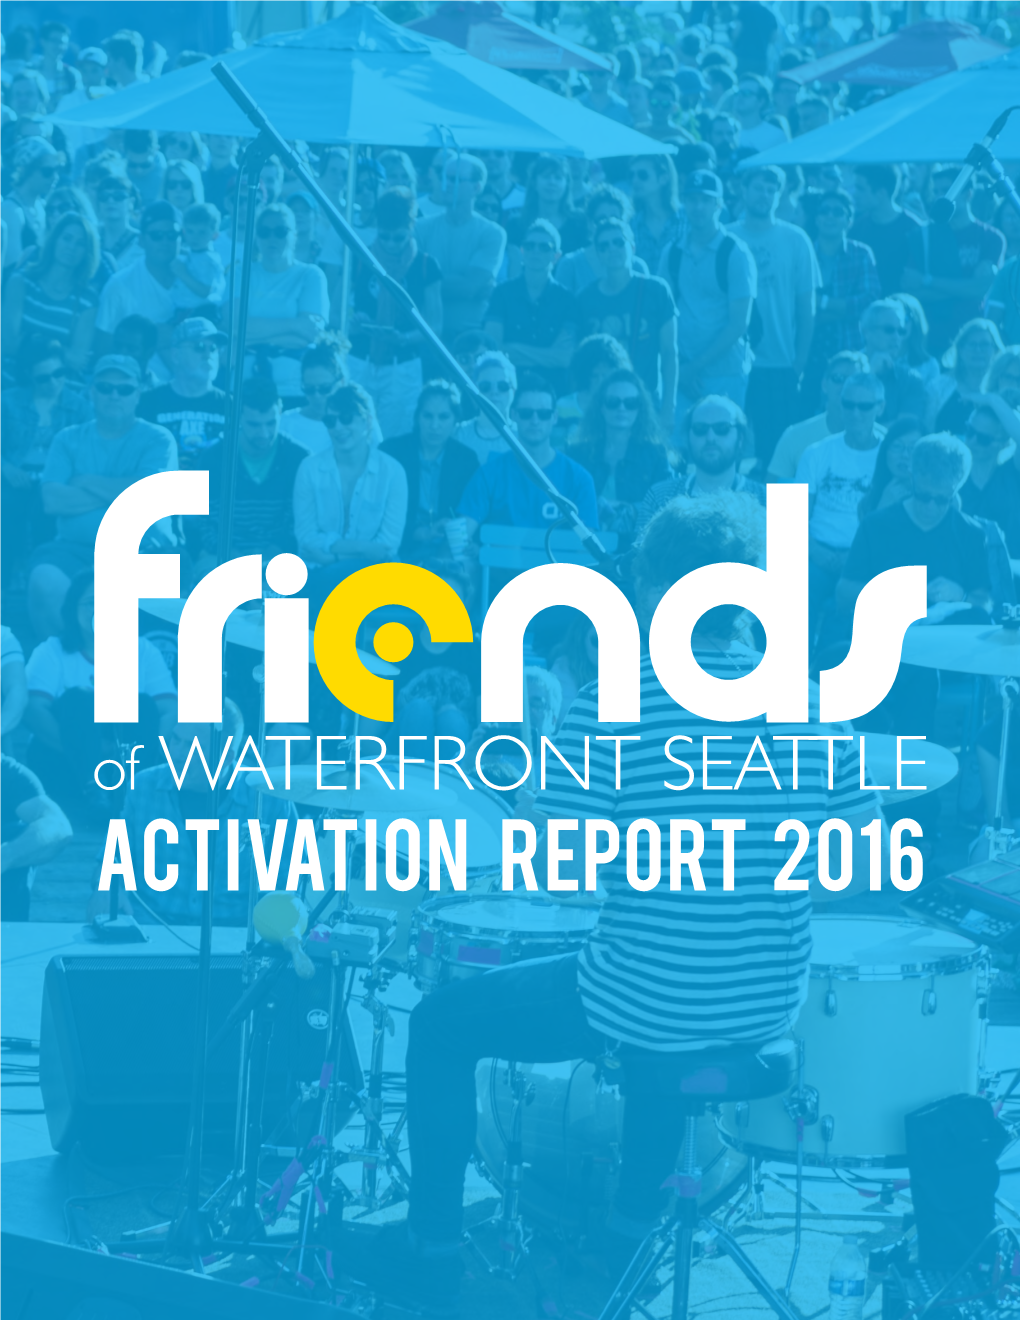 Activation Report 2016 Executive Summary